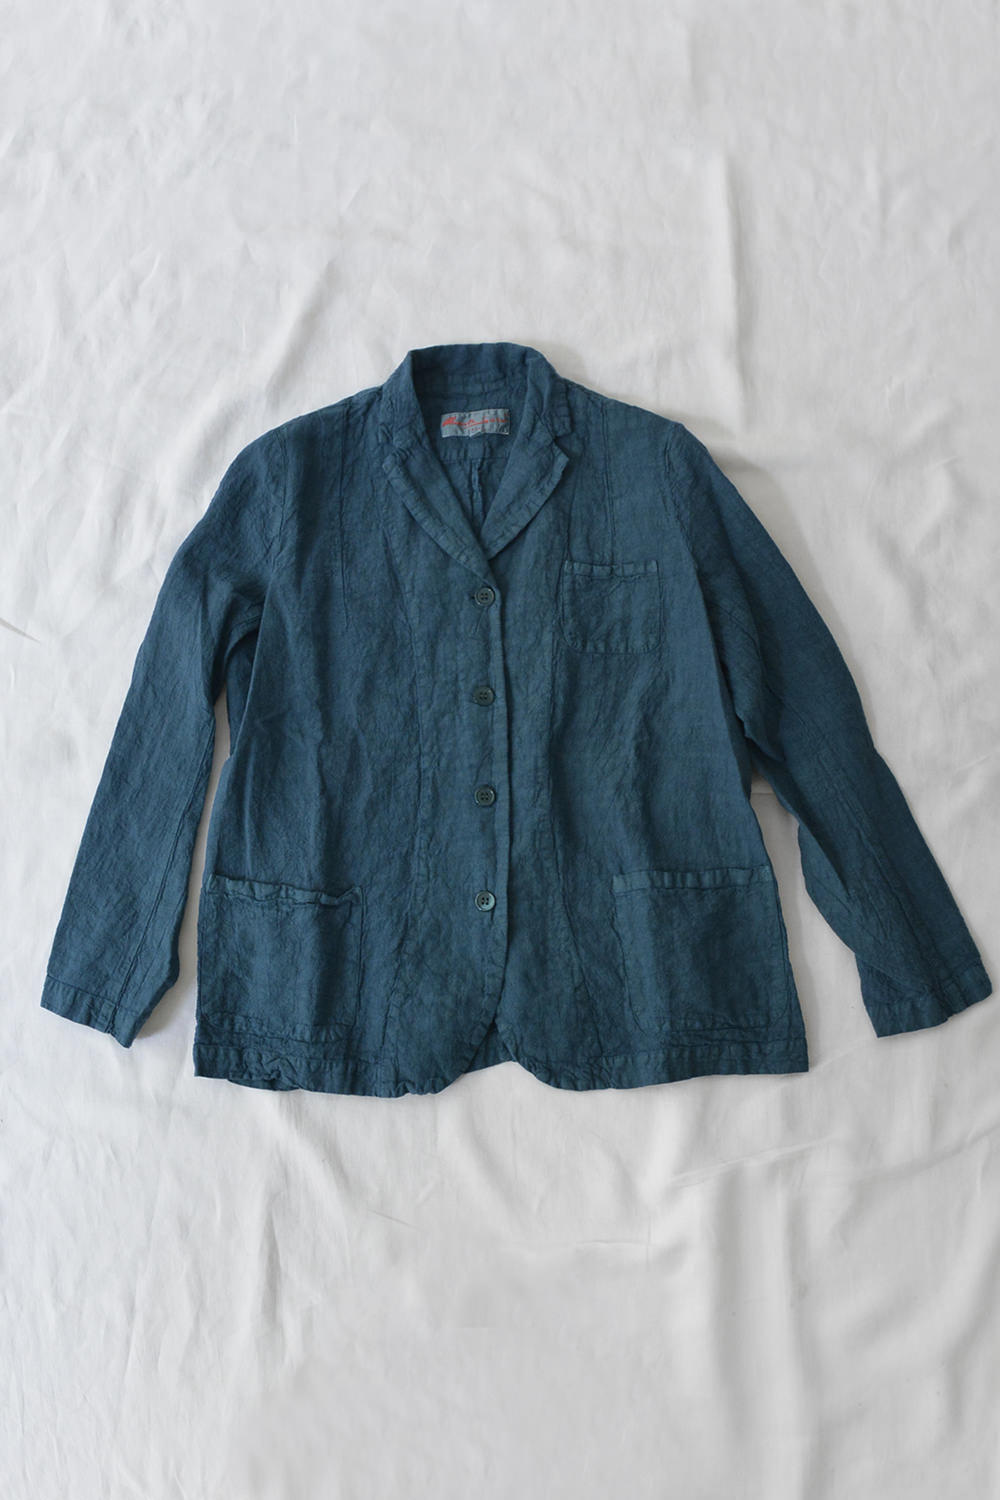 Manuelle Guibal Linen Jacket Oli Galapagos Top Picture